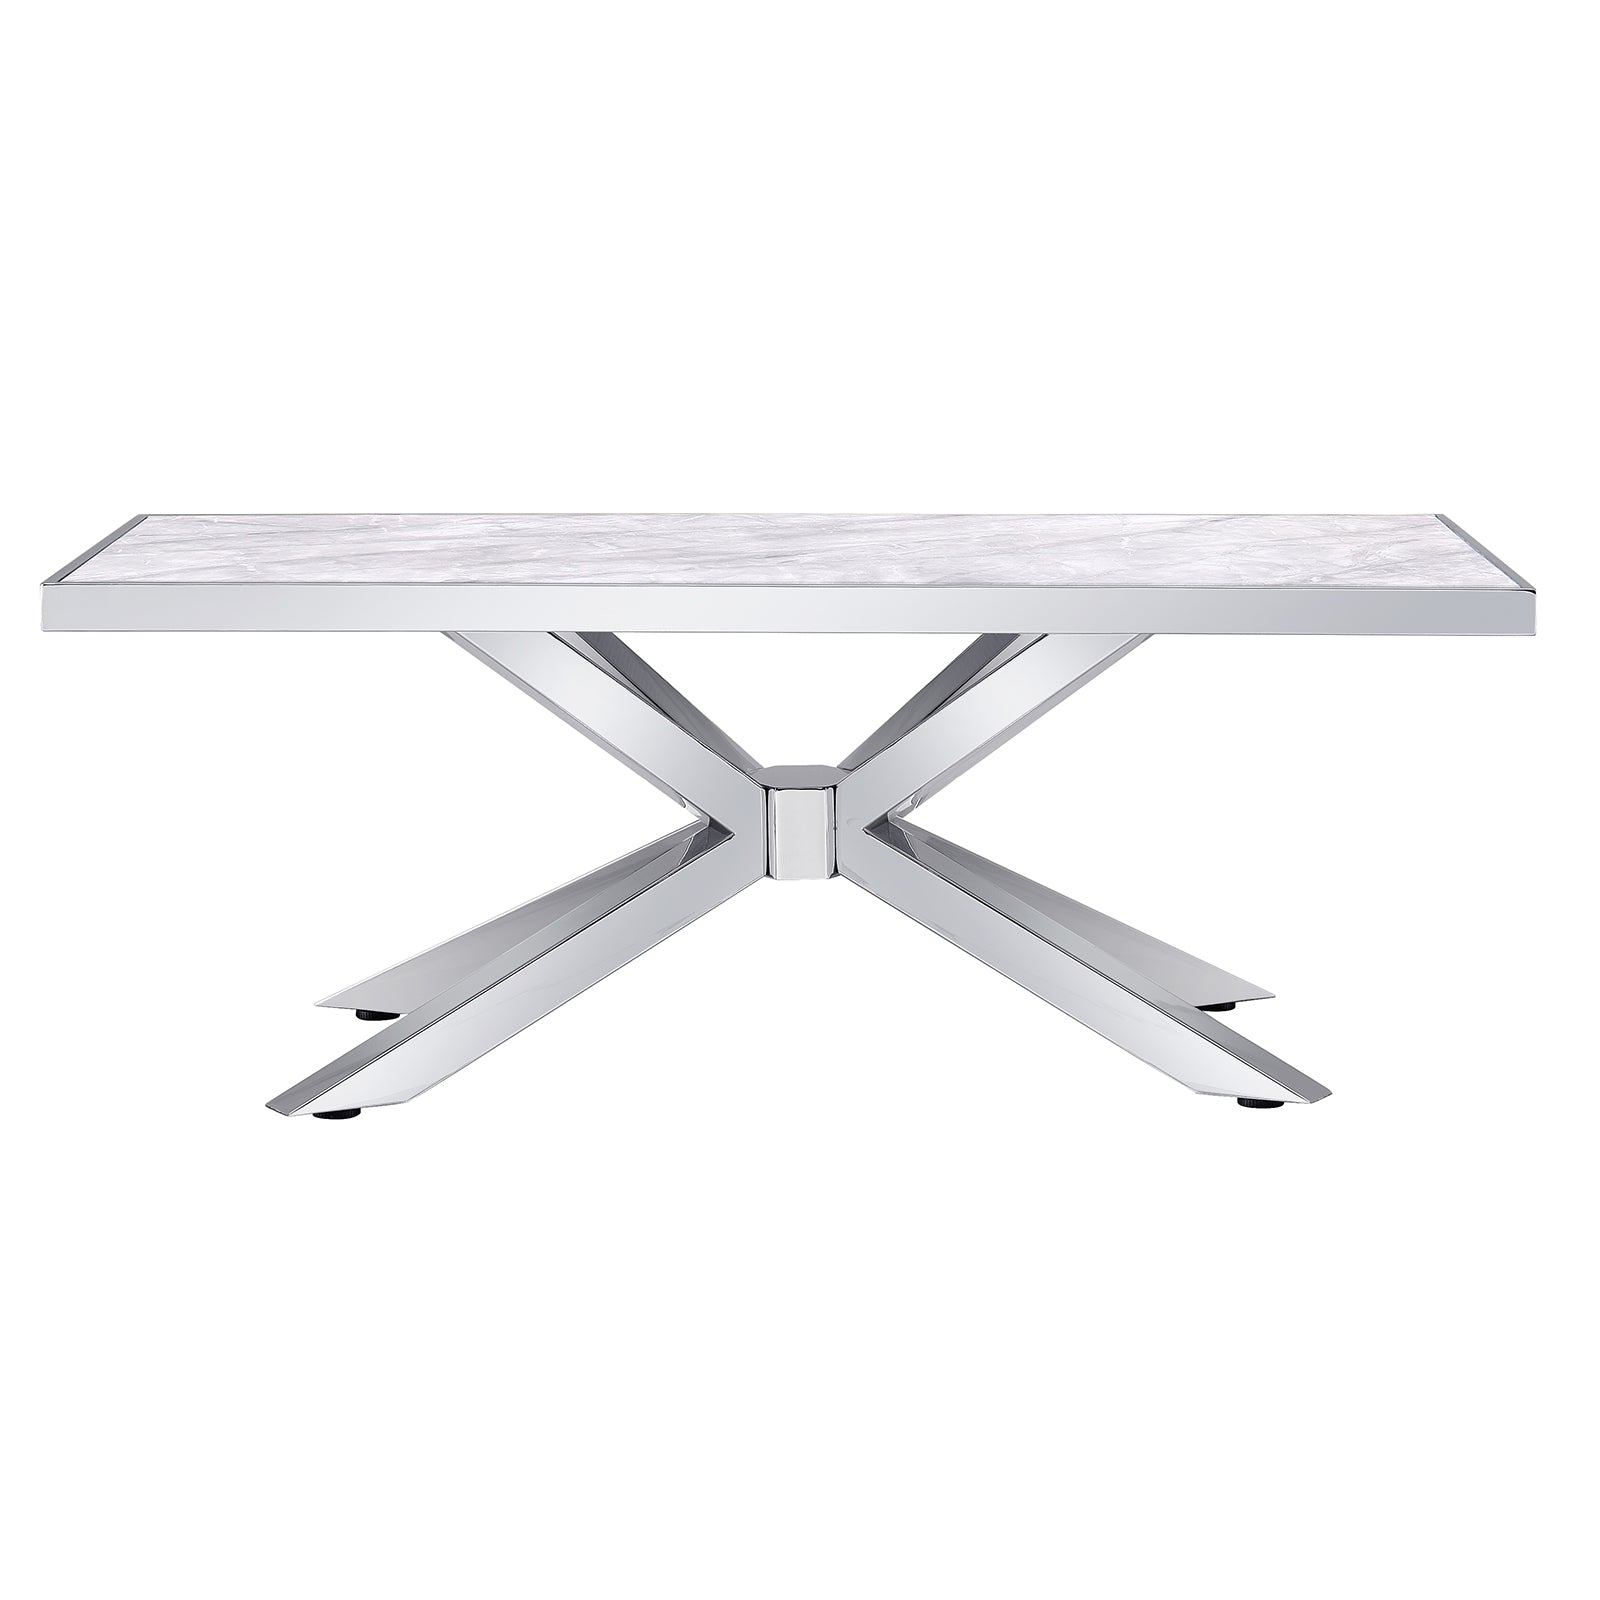 Contemporary Silver Coffee Table: Stylish and Durable, Enhancing Home Decor